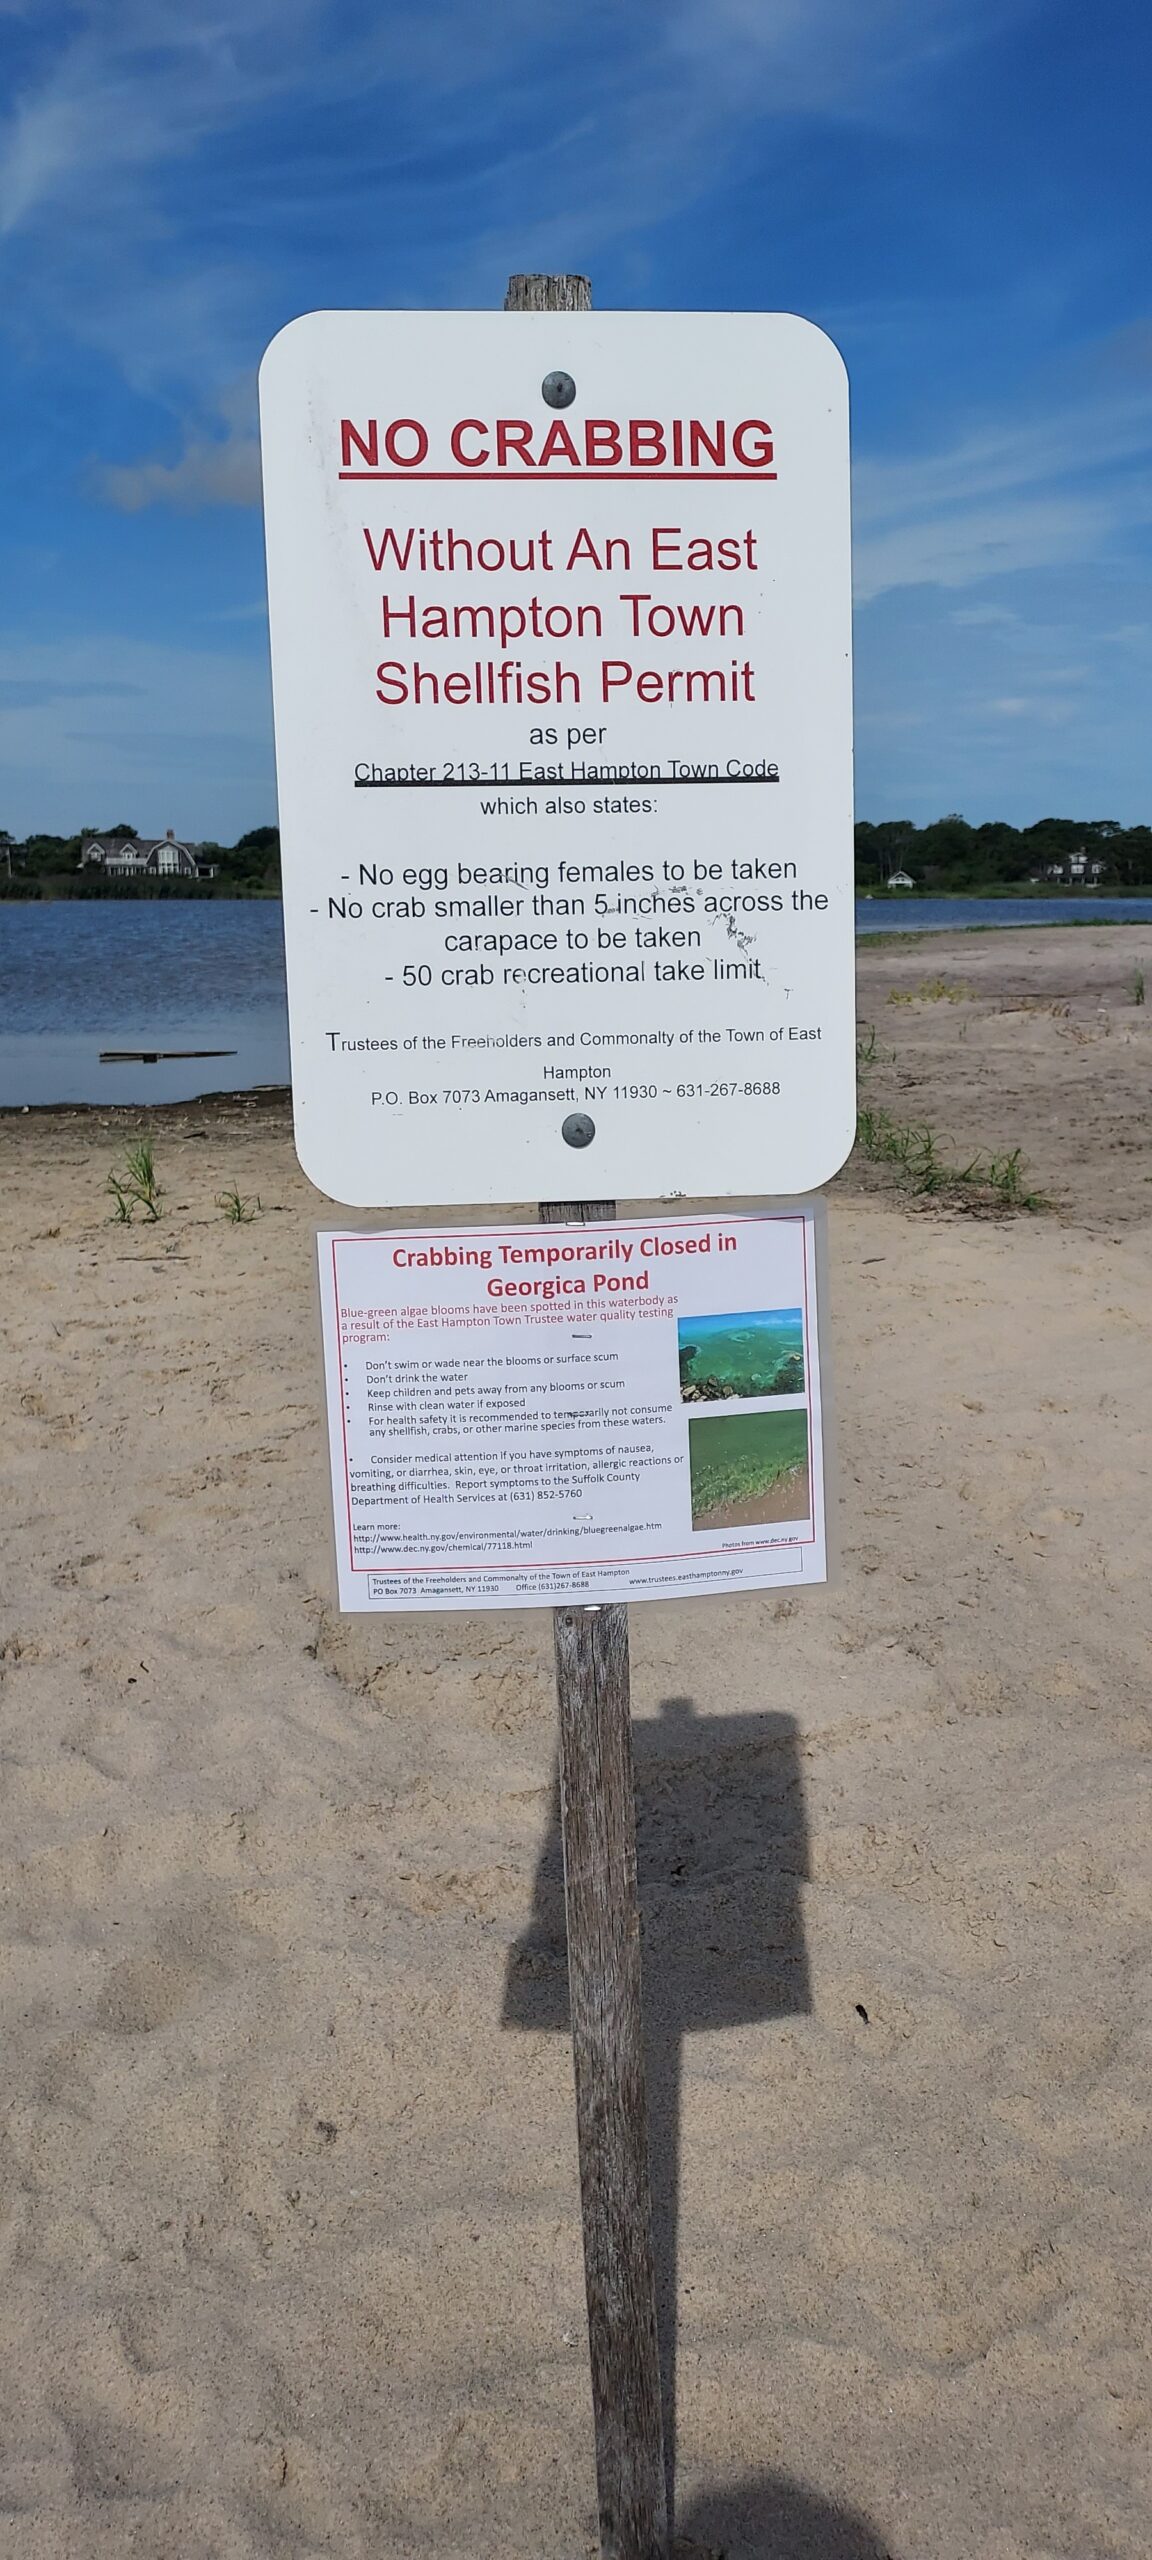 Warnings abound at the edge of Georgica Pond about the rules for crabbing but East Hampton authorities say those illegally poaching crabs in the pond clearly know that what they are doing is illegal and have devised a network of schemes for avoiding capture or punishment even when caught.